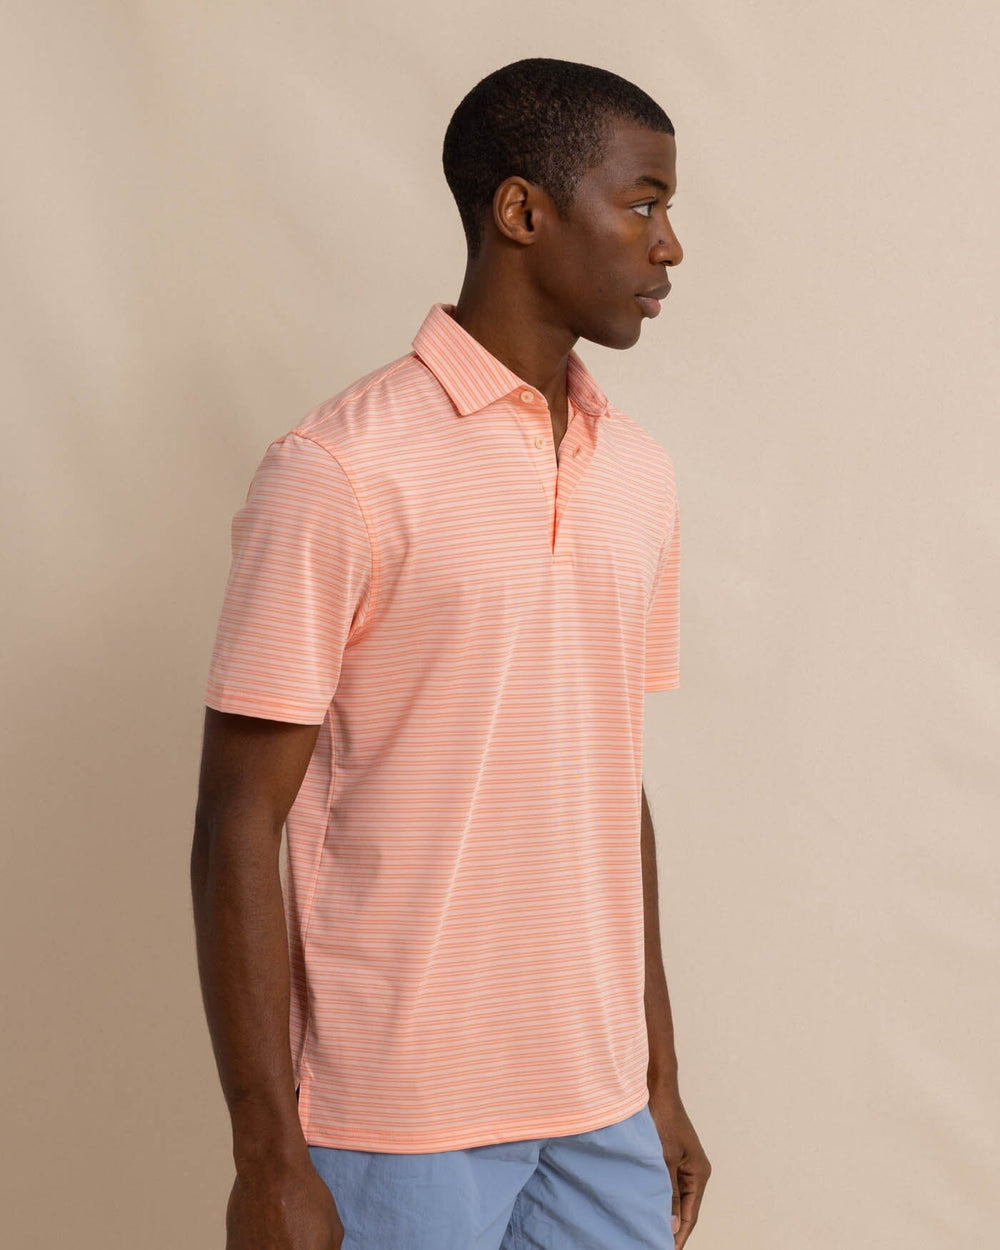 The front view of the Southern Tide brrr eeze Beattie Stripe Performance Polo by Southern Tide - Apricot Blush Coral